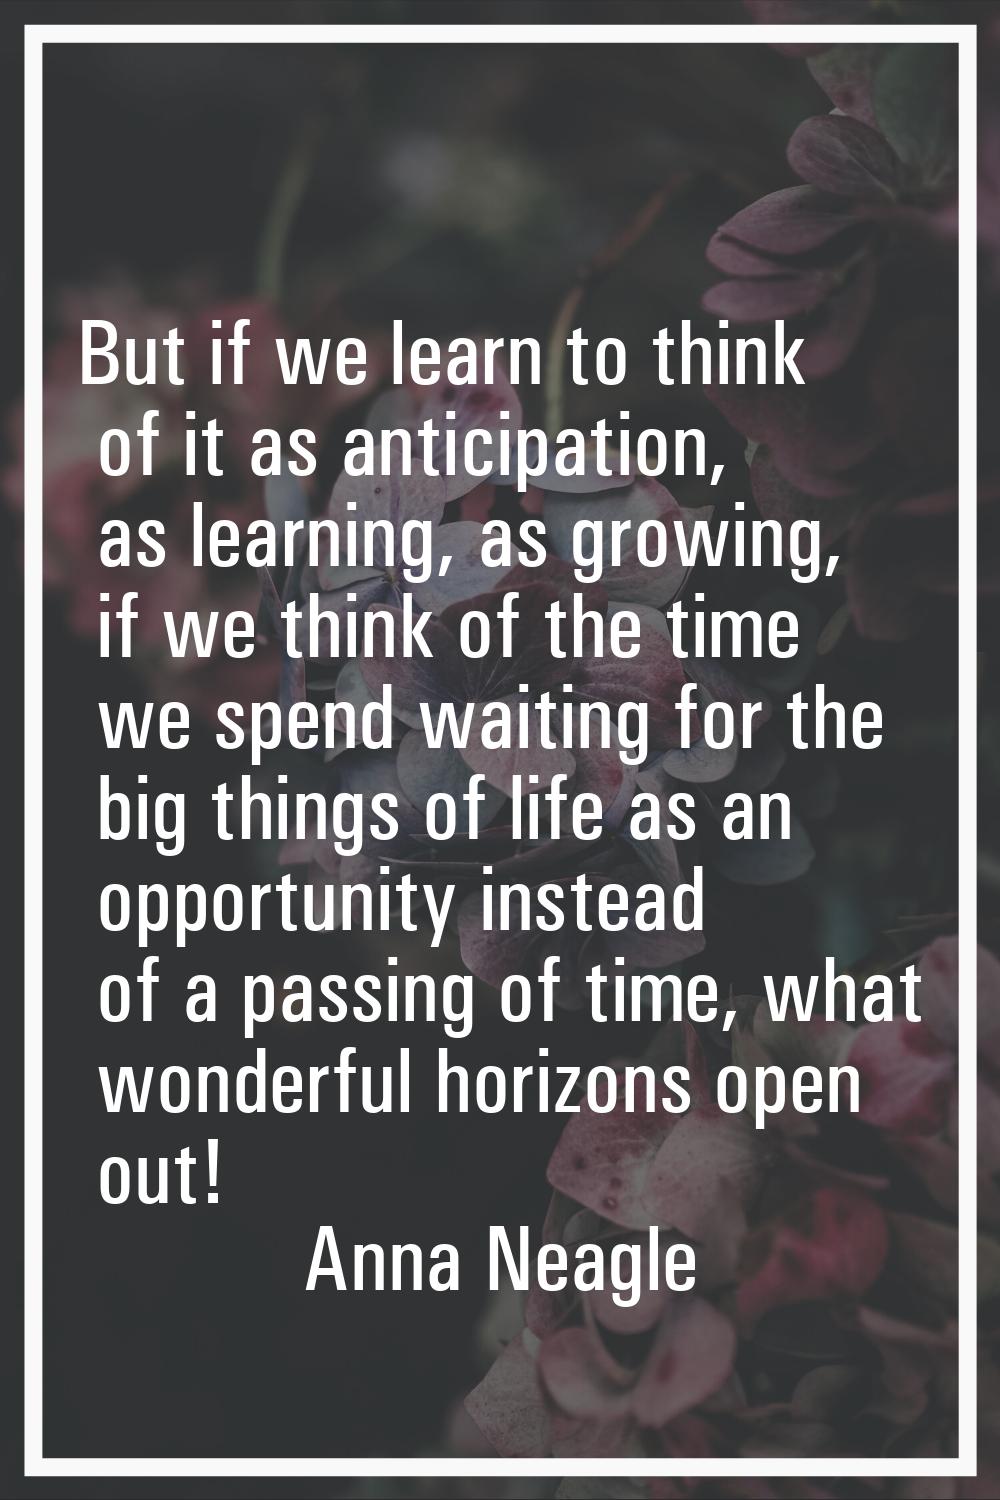 But if we learn to think of it as anticipation, as learning, as growing, if we think of the time we